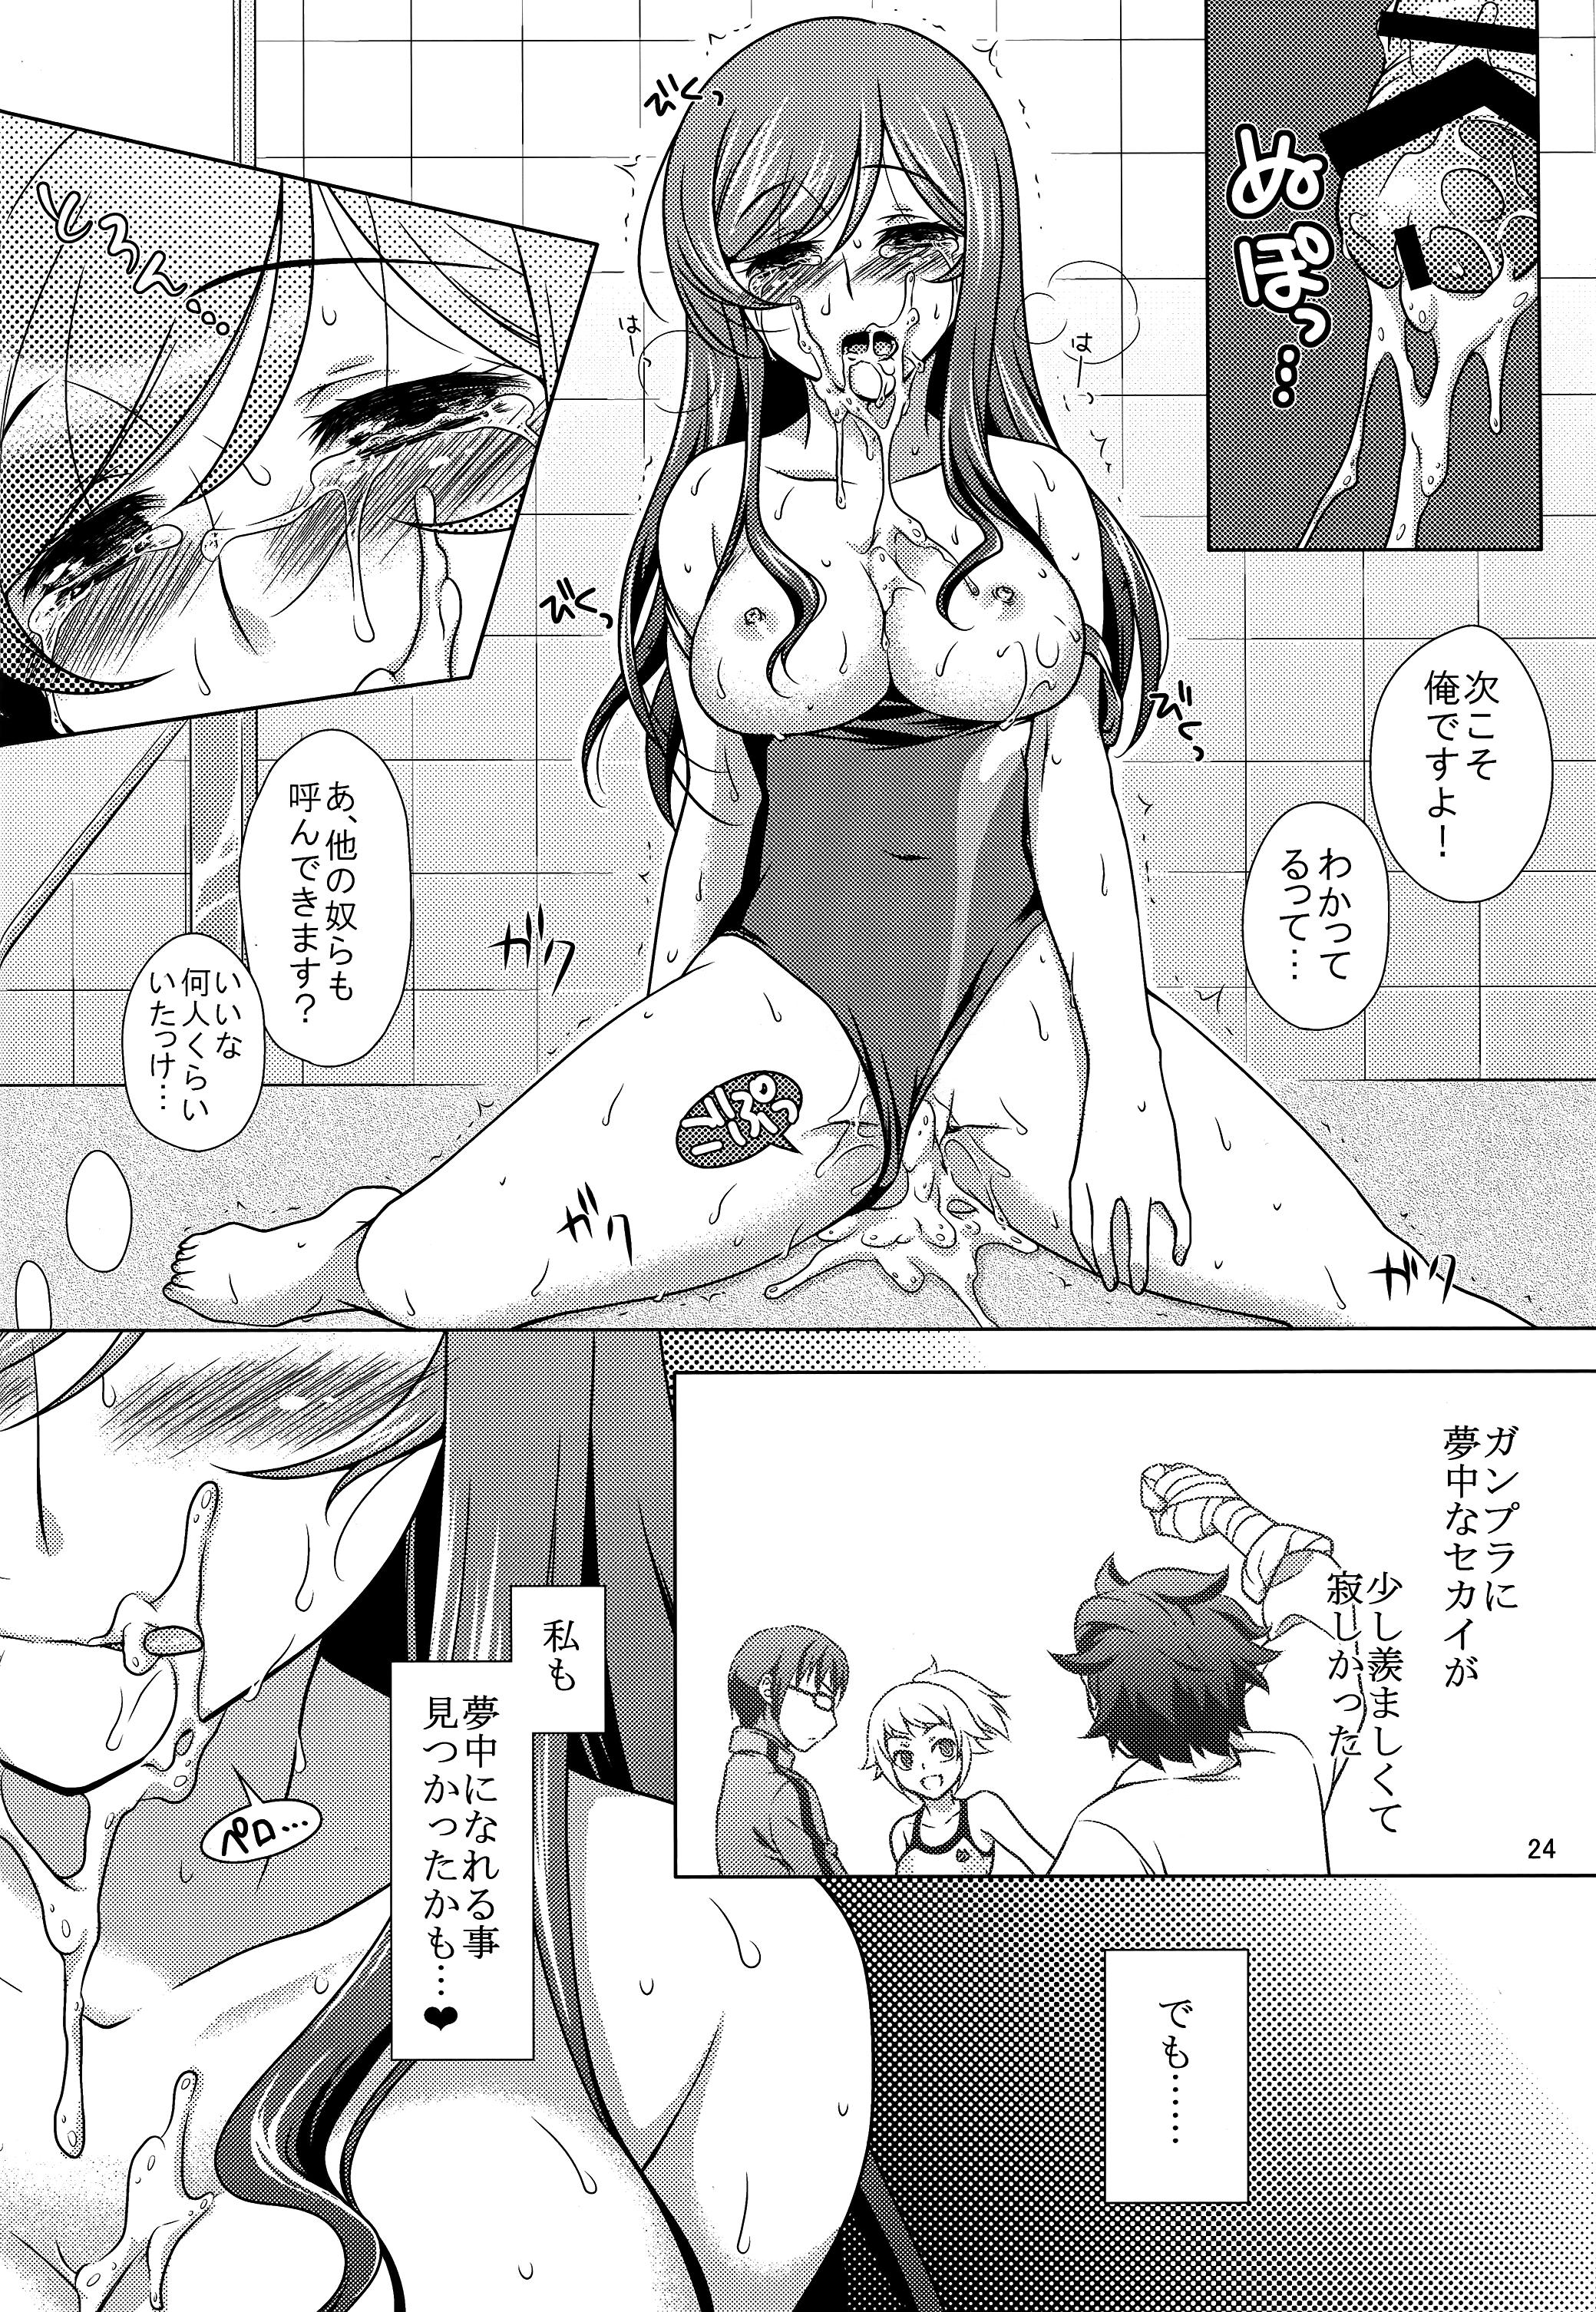 Pinay FIELD?? POOLSIDE - Gundam build fighters try Erotic - Page 24